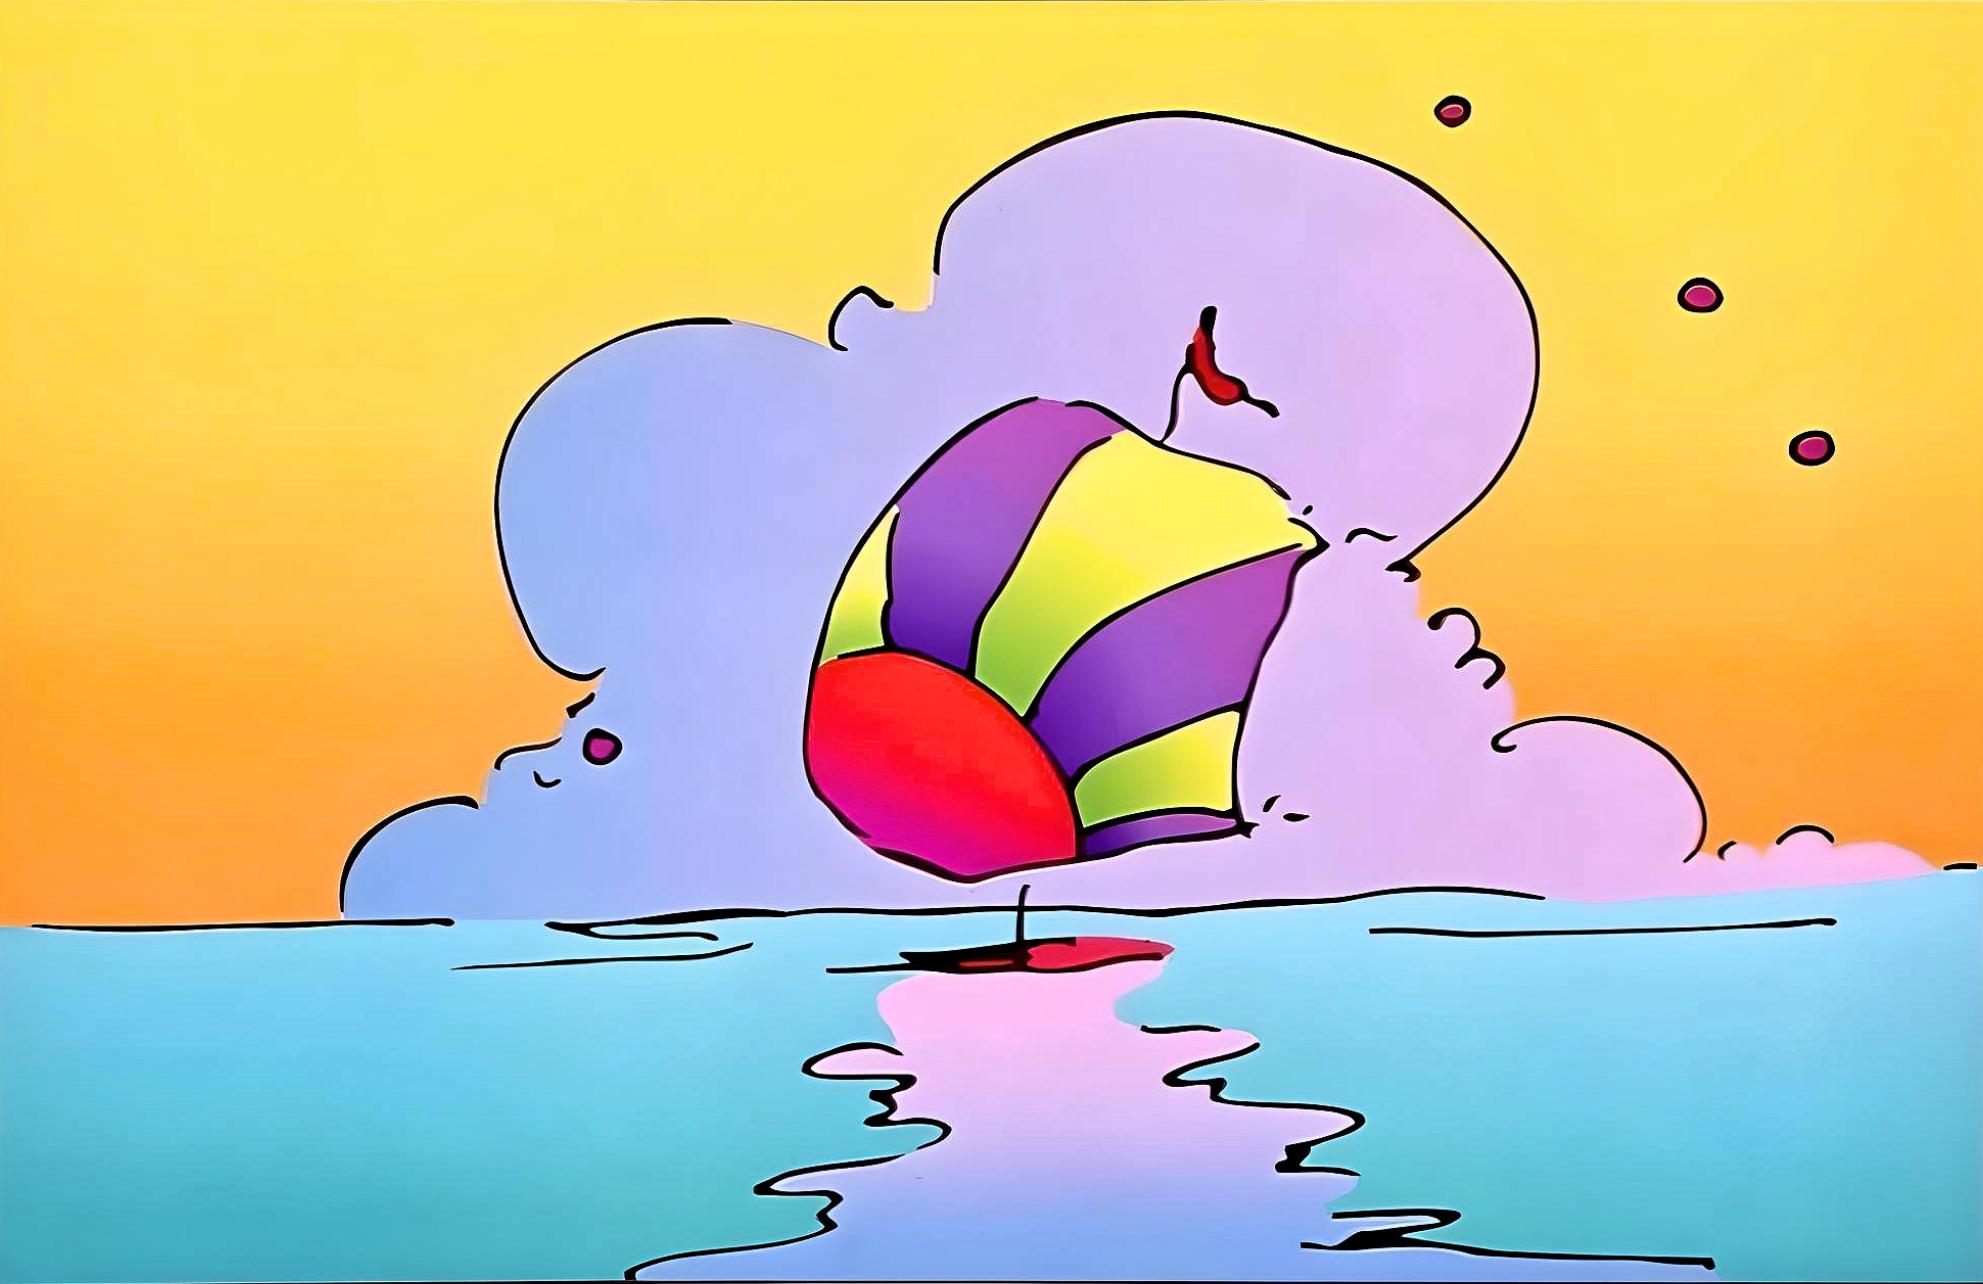 Protect Our Future Ver. II, Peter Max